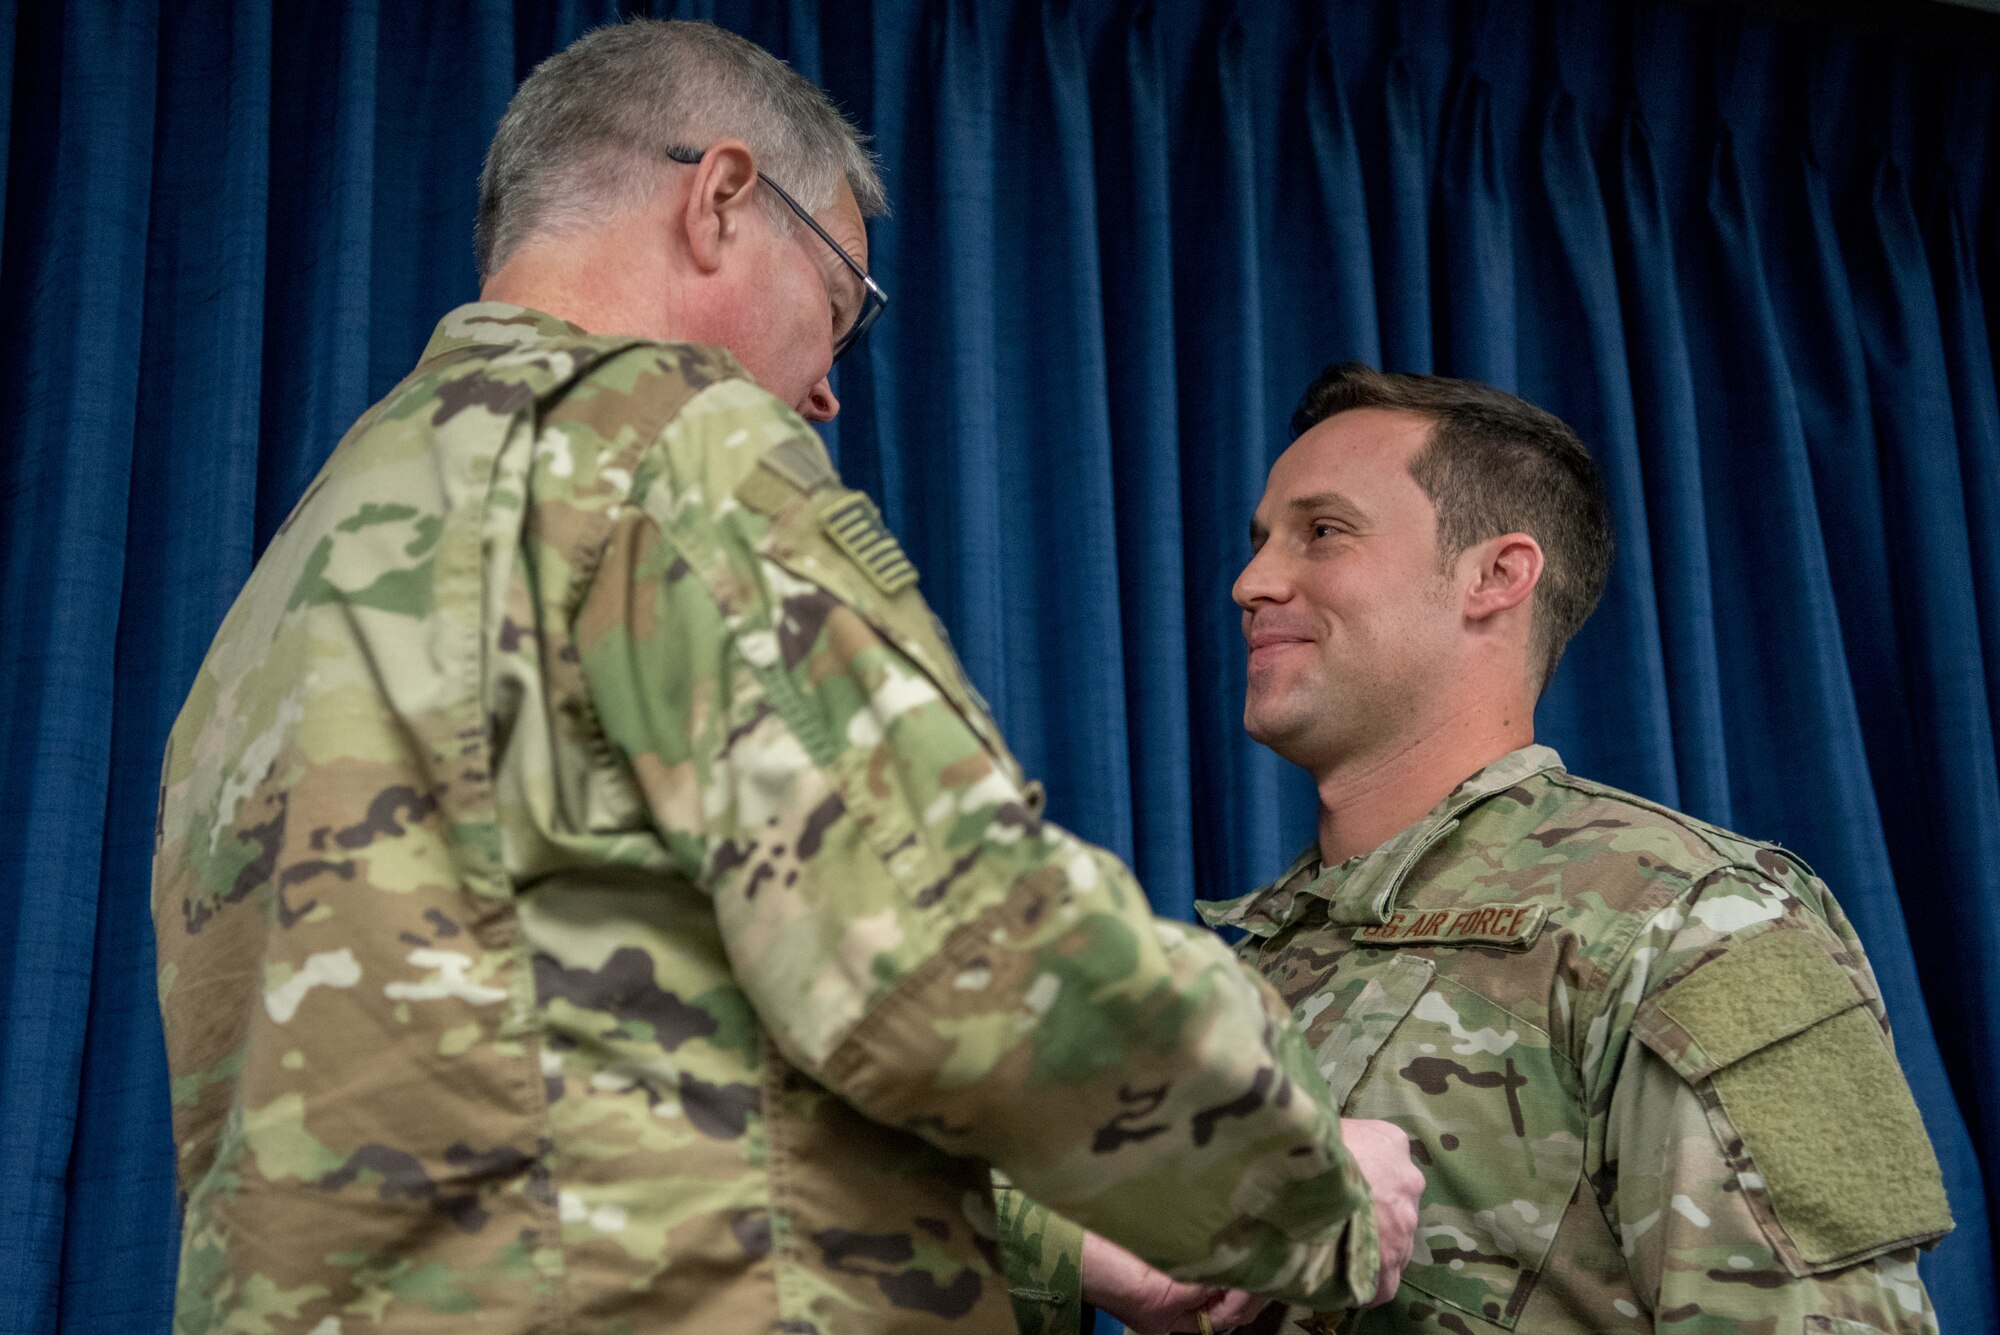 Staff Sgt. Daniel P. Keller (right), a combat controller for the 123rd Special Tactics Squadron, receives the Bronze Star Medal from Col. David Mounkes, commander of the 123rd Airlift Wing, during a ceremony at the Kentucky Air National Guard Base in Louisville, Ky., Nov. 17, 2018. Keller distinguished himself in 2017 for meritorious service in Eastern Afghanistan. His performance resulted in seven medical evacuations of American and partner forces, 209 enemies killed in action, 11 enemies wounded in action, and 163 defensive fighting positions destroyed. (U.S. Air National Guard photo by Staff Sgt. Joshua Horton)